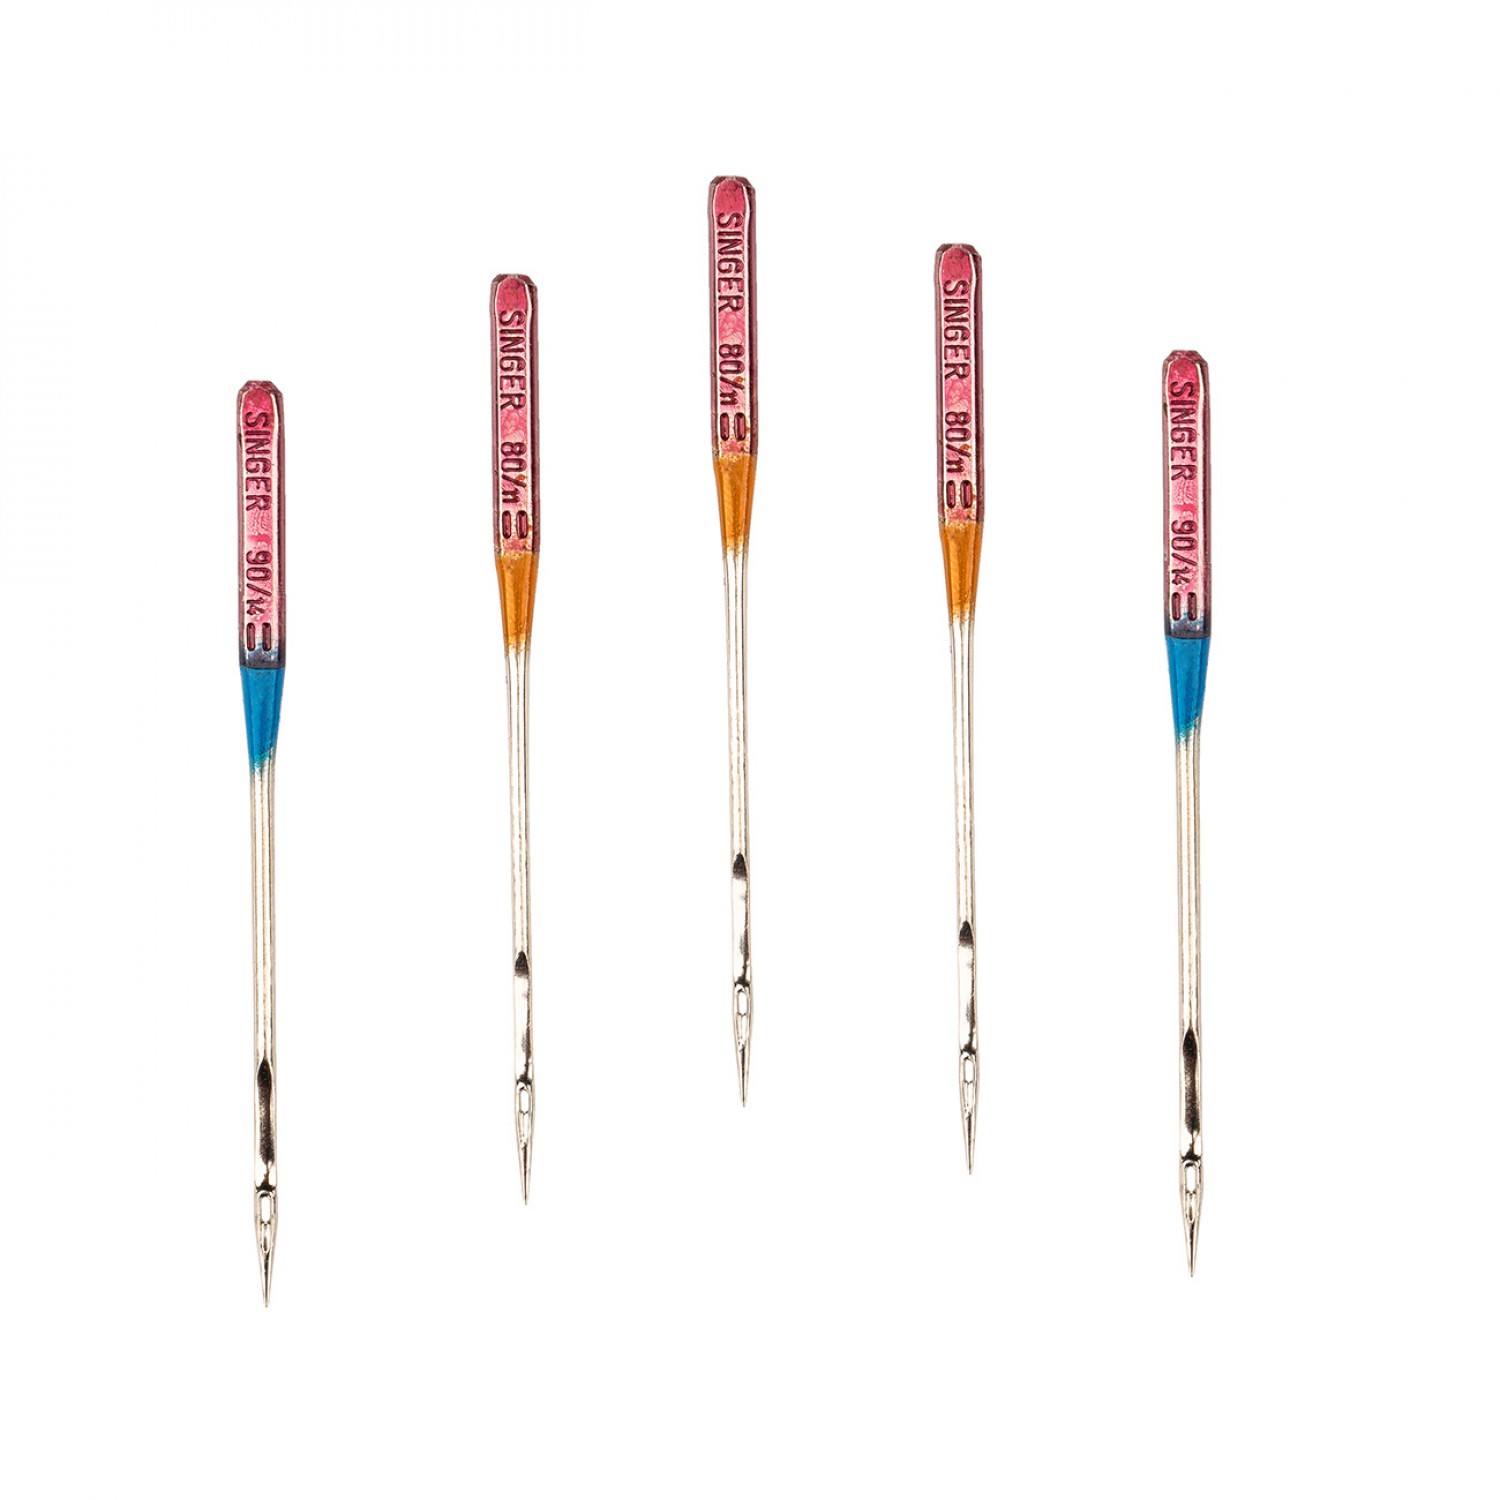 Singer Quilting Needles (5pk) - Assorted image # 69230